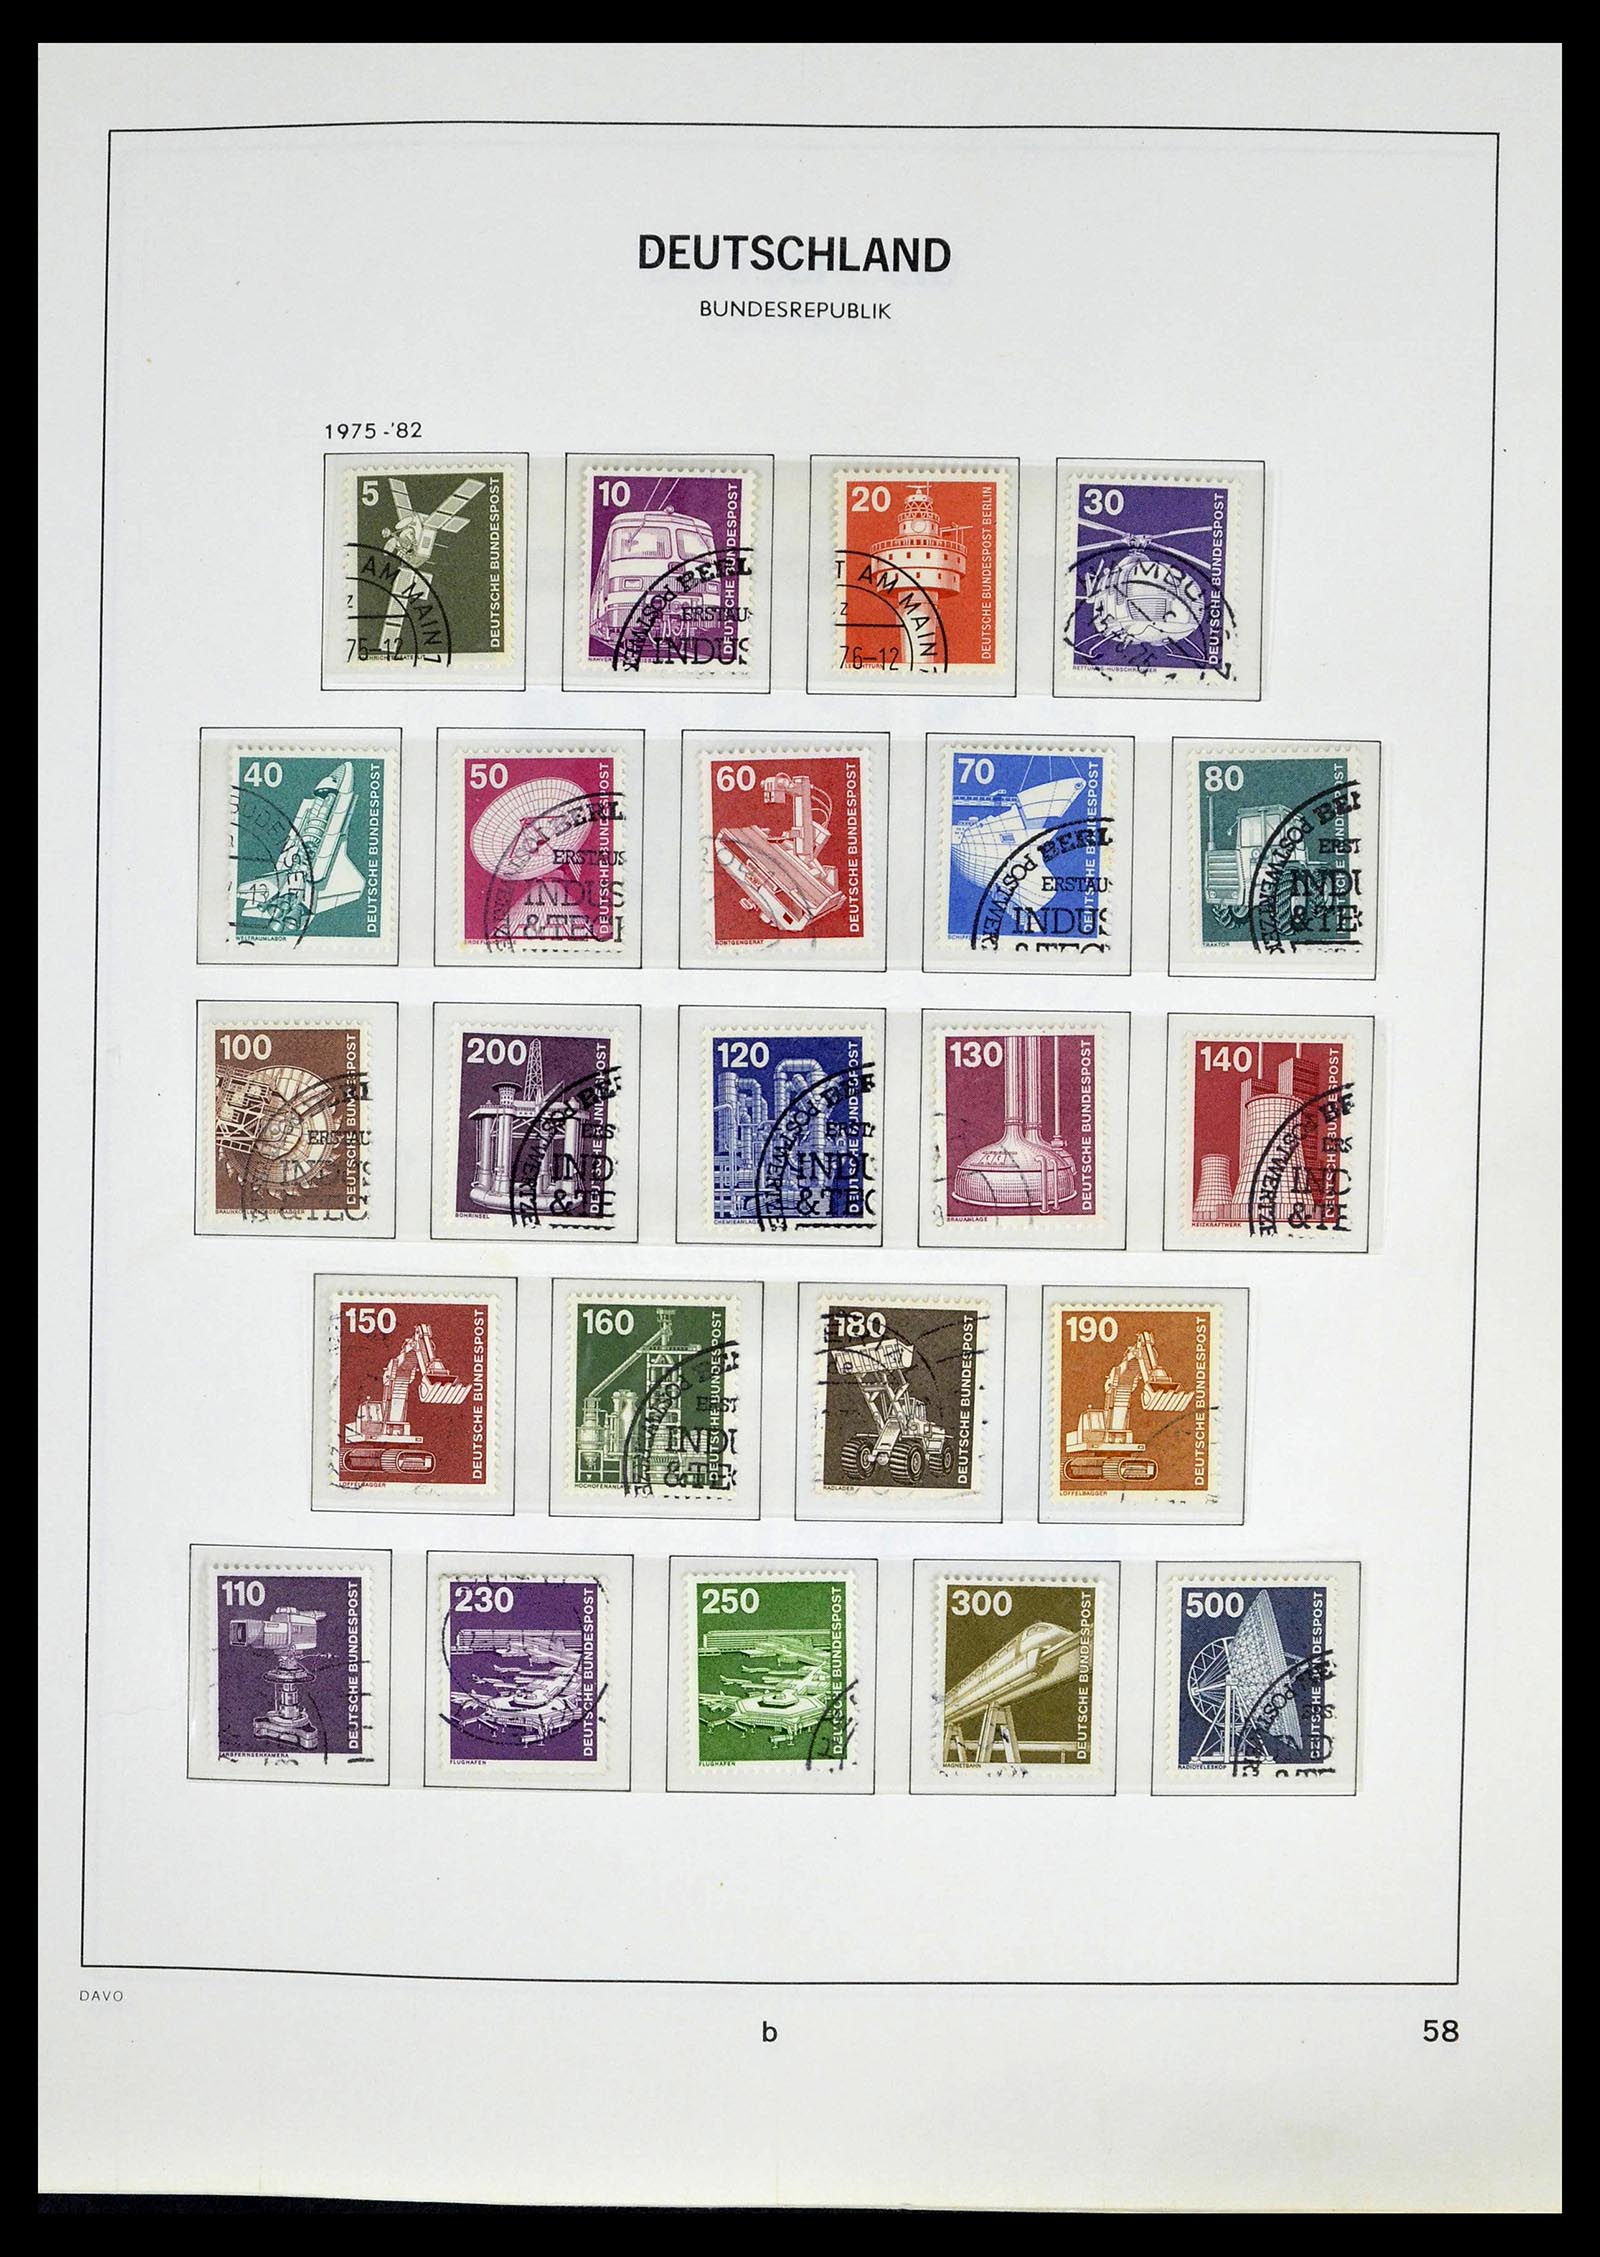 39326 0058 - Stamp collection 39326 Bundespost 1949-2003.